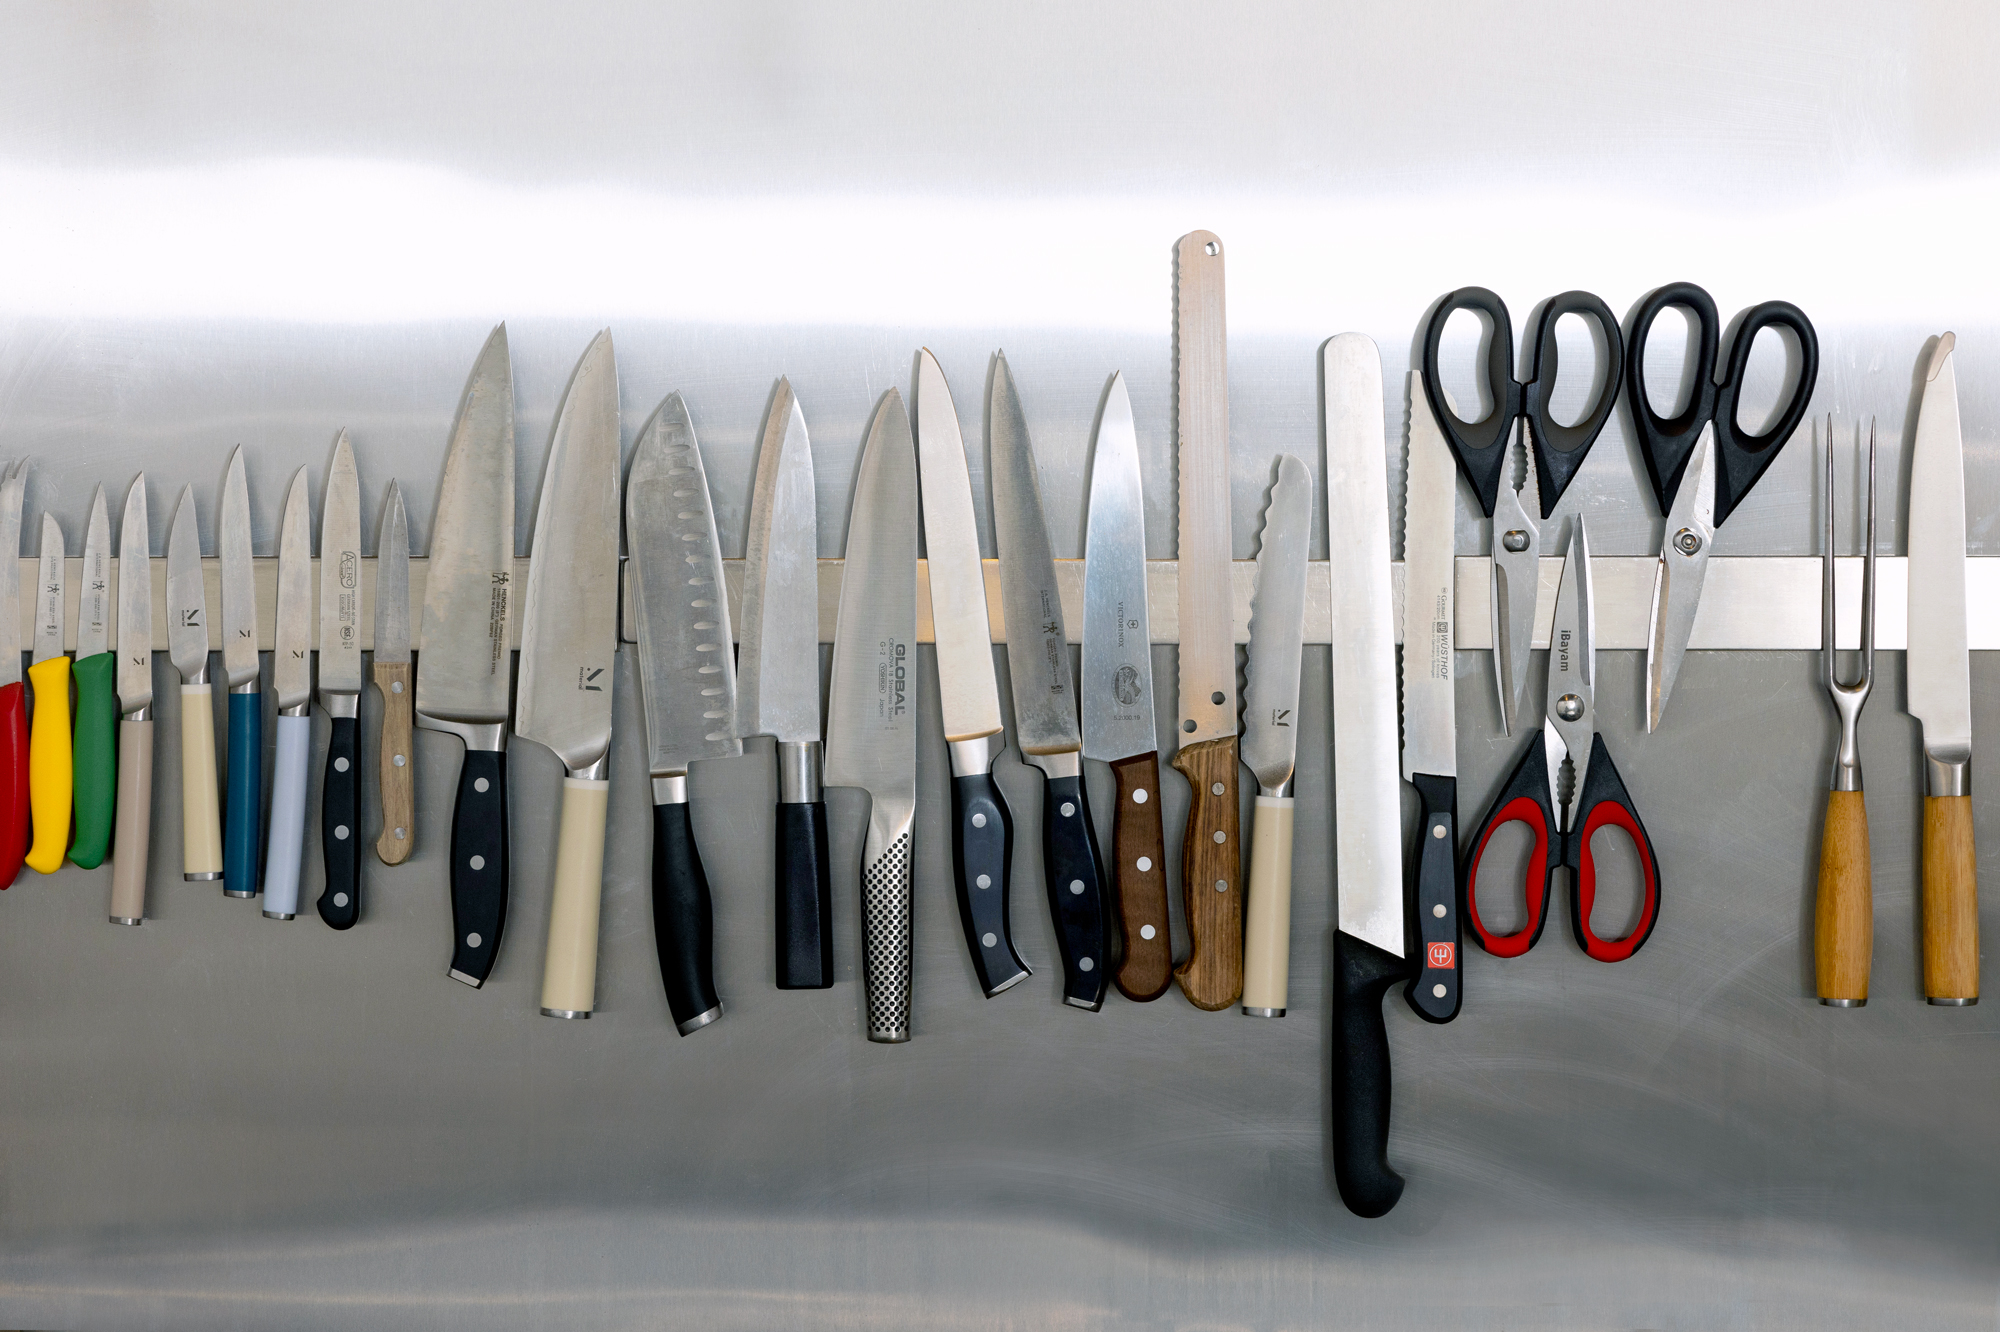 Image of knives at Freshmade, professional food photography agency.